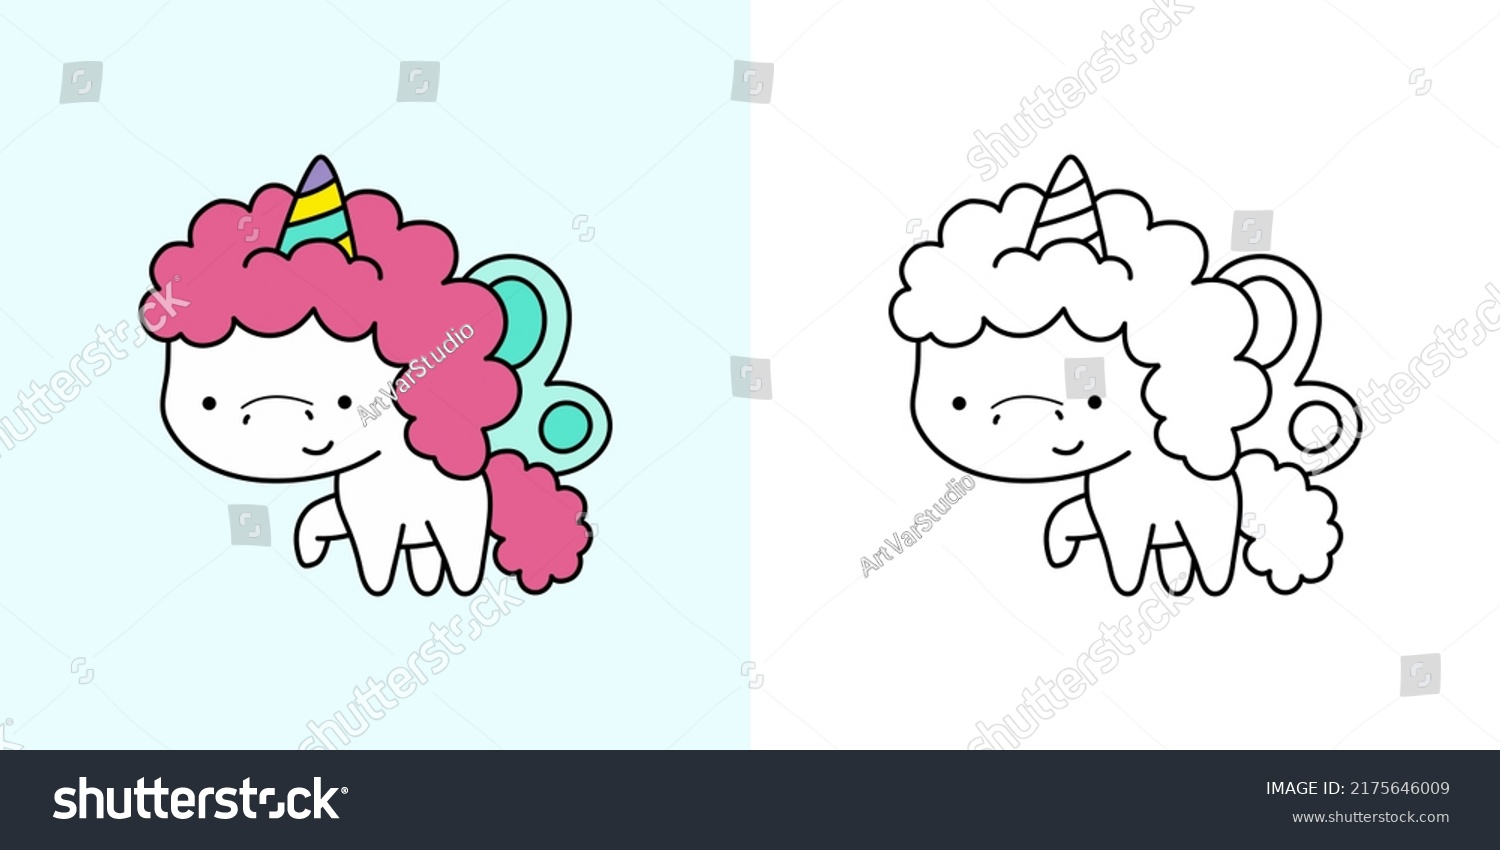 SVG of Kawaii Clipart Unicorn Illustration and For Coloring Page. Funny Kawaii Unicorn. Vector Illustration of a Kawaii Animal for Stickers, Baby Shower, Coloring Pages, Prints for Clothes.  svg